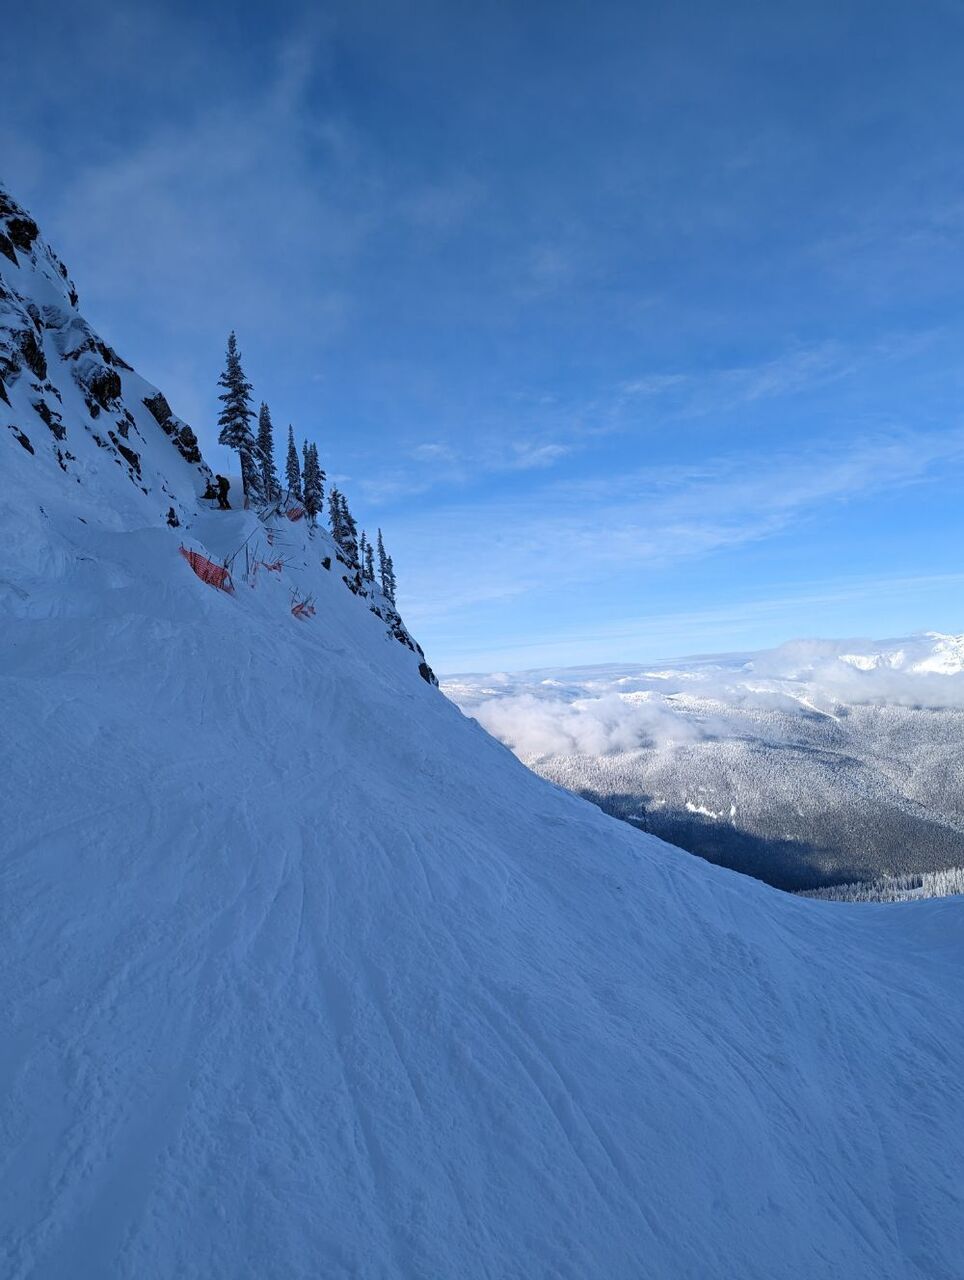 My friend dropping into the North Bowl.  The approach was... interesting.